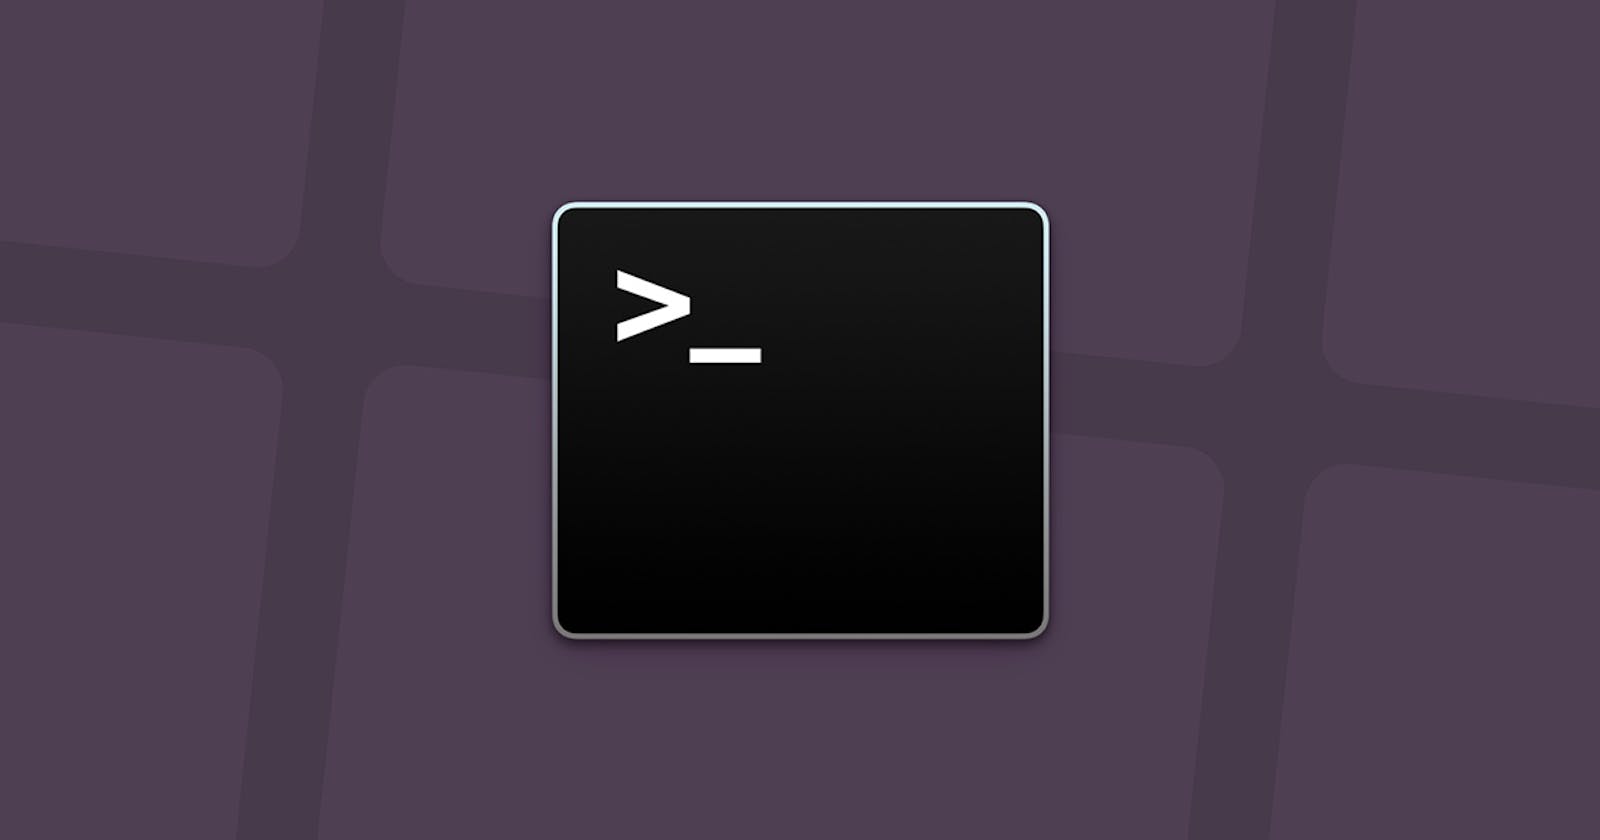 How To Use The Terminal On Mac